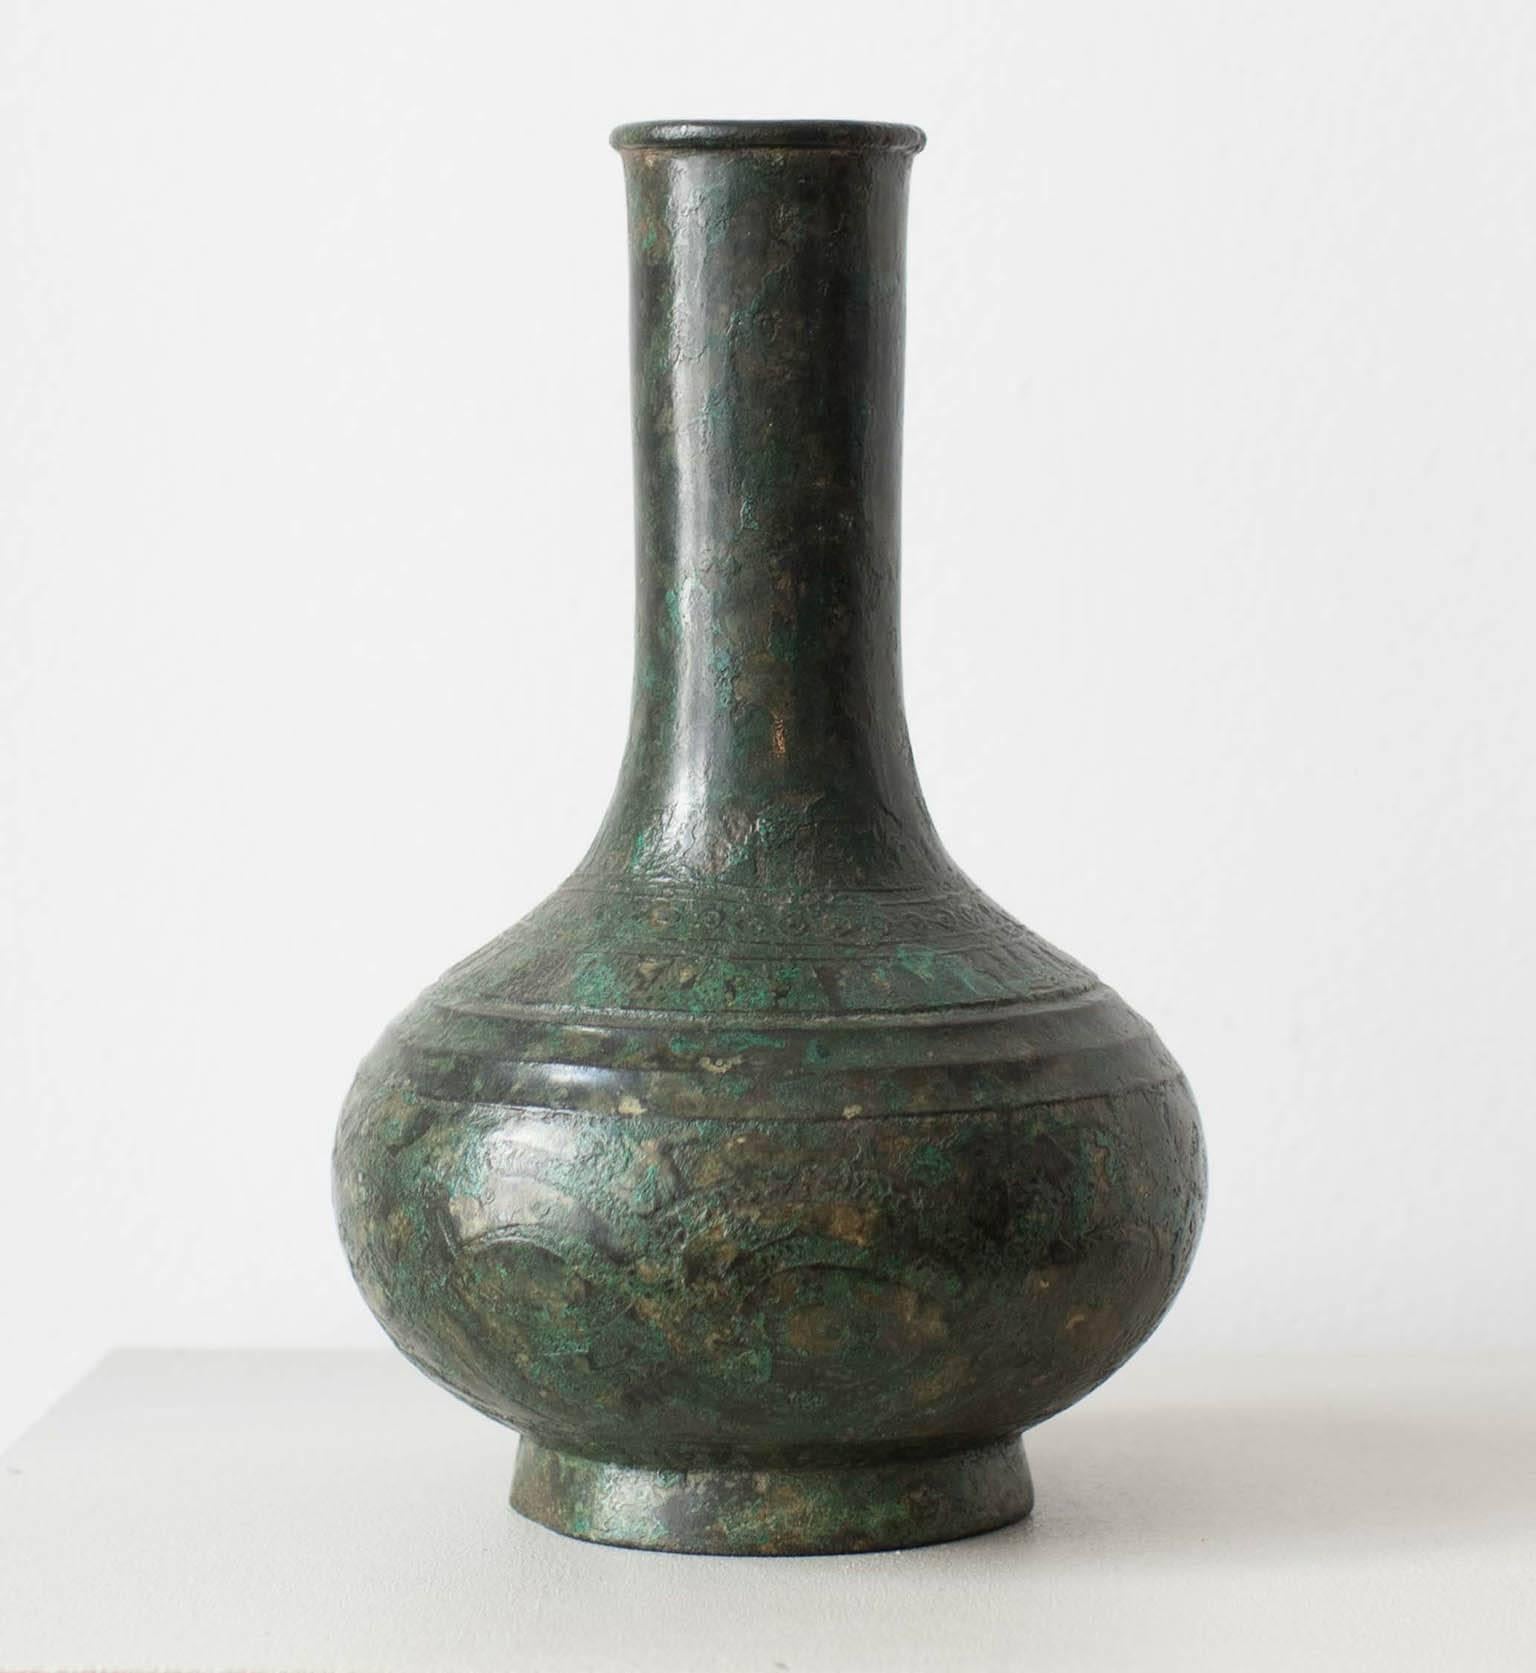 A Chinese bronze bottle vase, the shoulder and lower body with several registers of decoration above a spreading foot, the surface with rich patina, Qing dynasty 18th/19th century. 

Provenance: Private Collection. Spink and Son Ltd., London 1958.
 